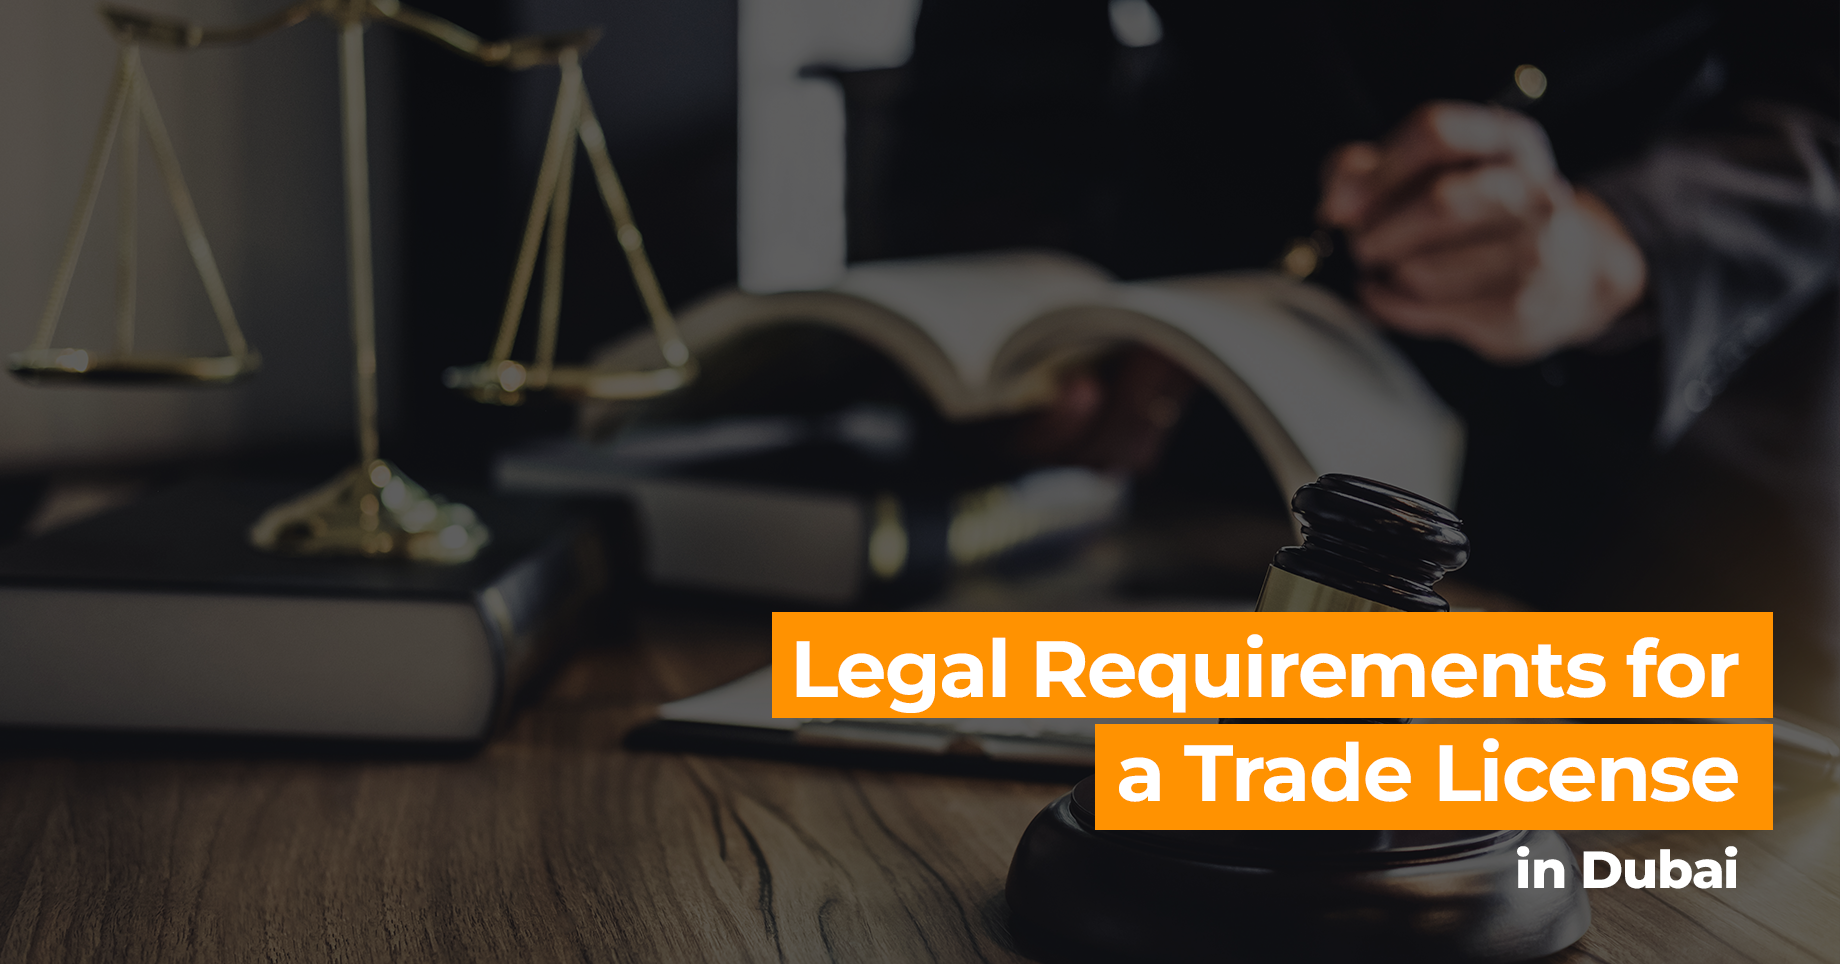 Legal Requirements for a Trade License in Dubai